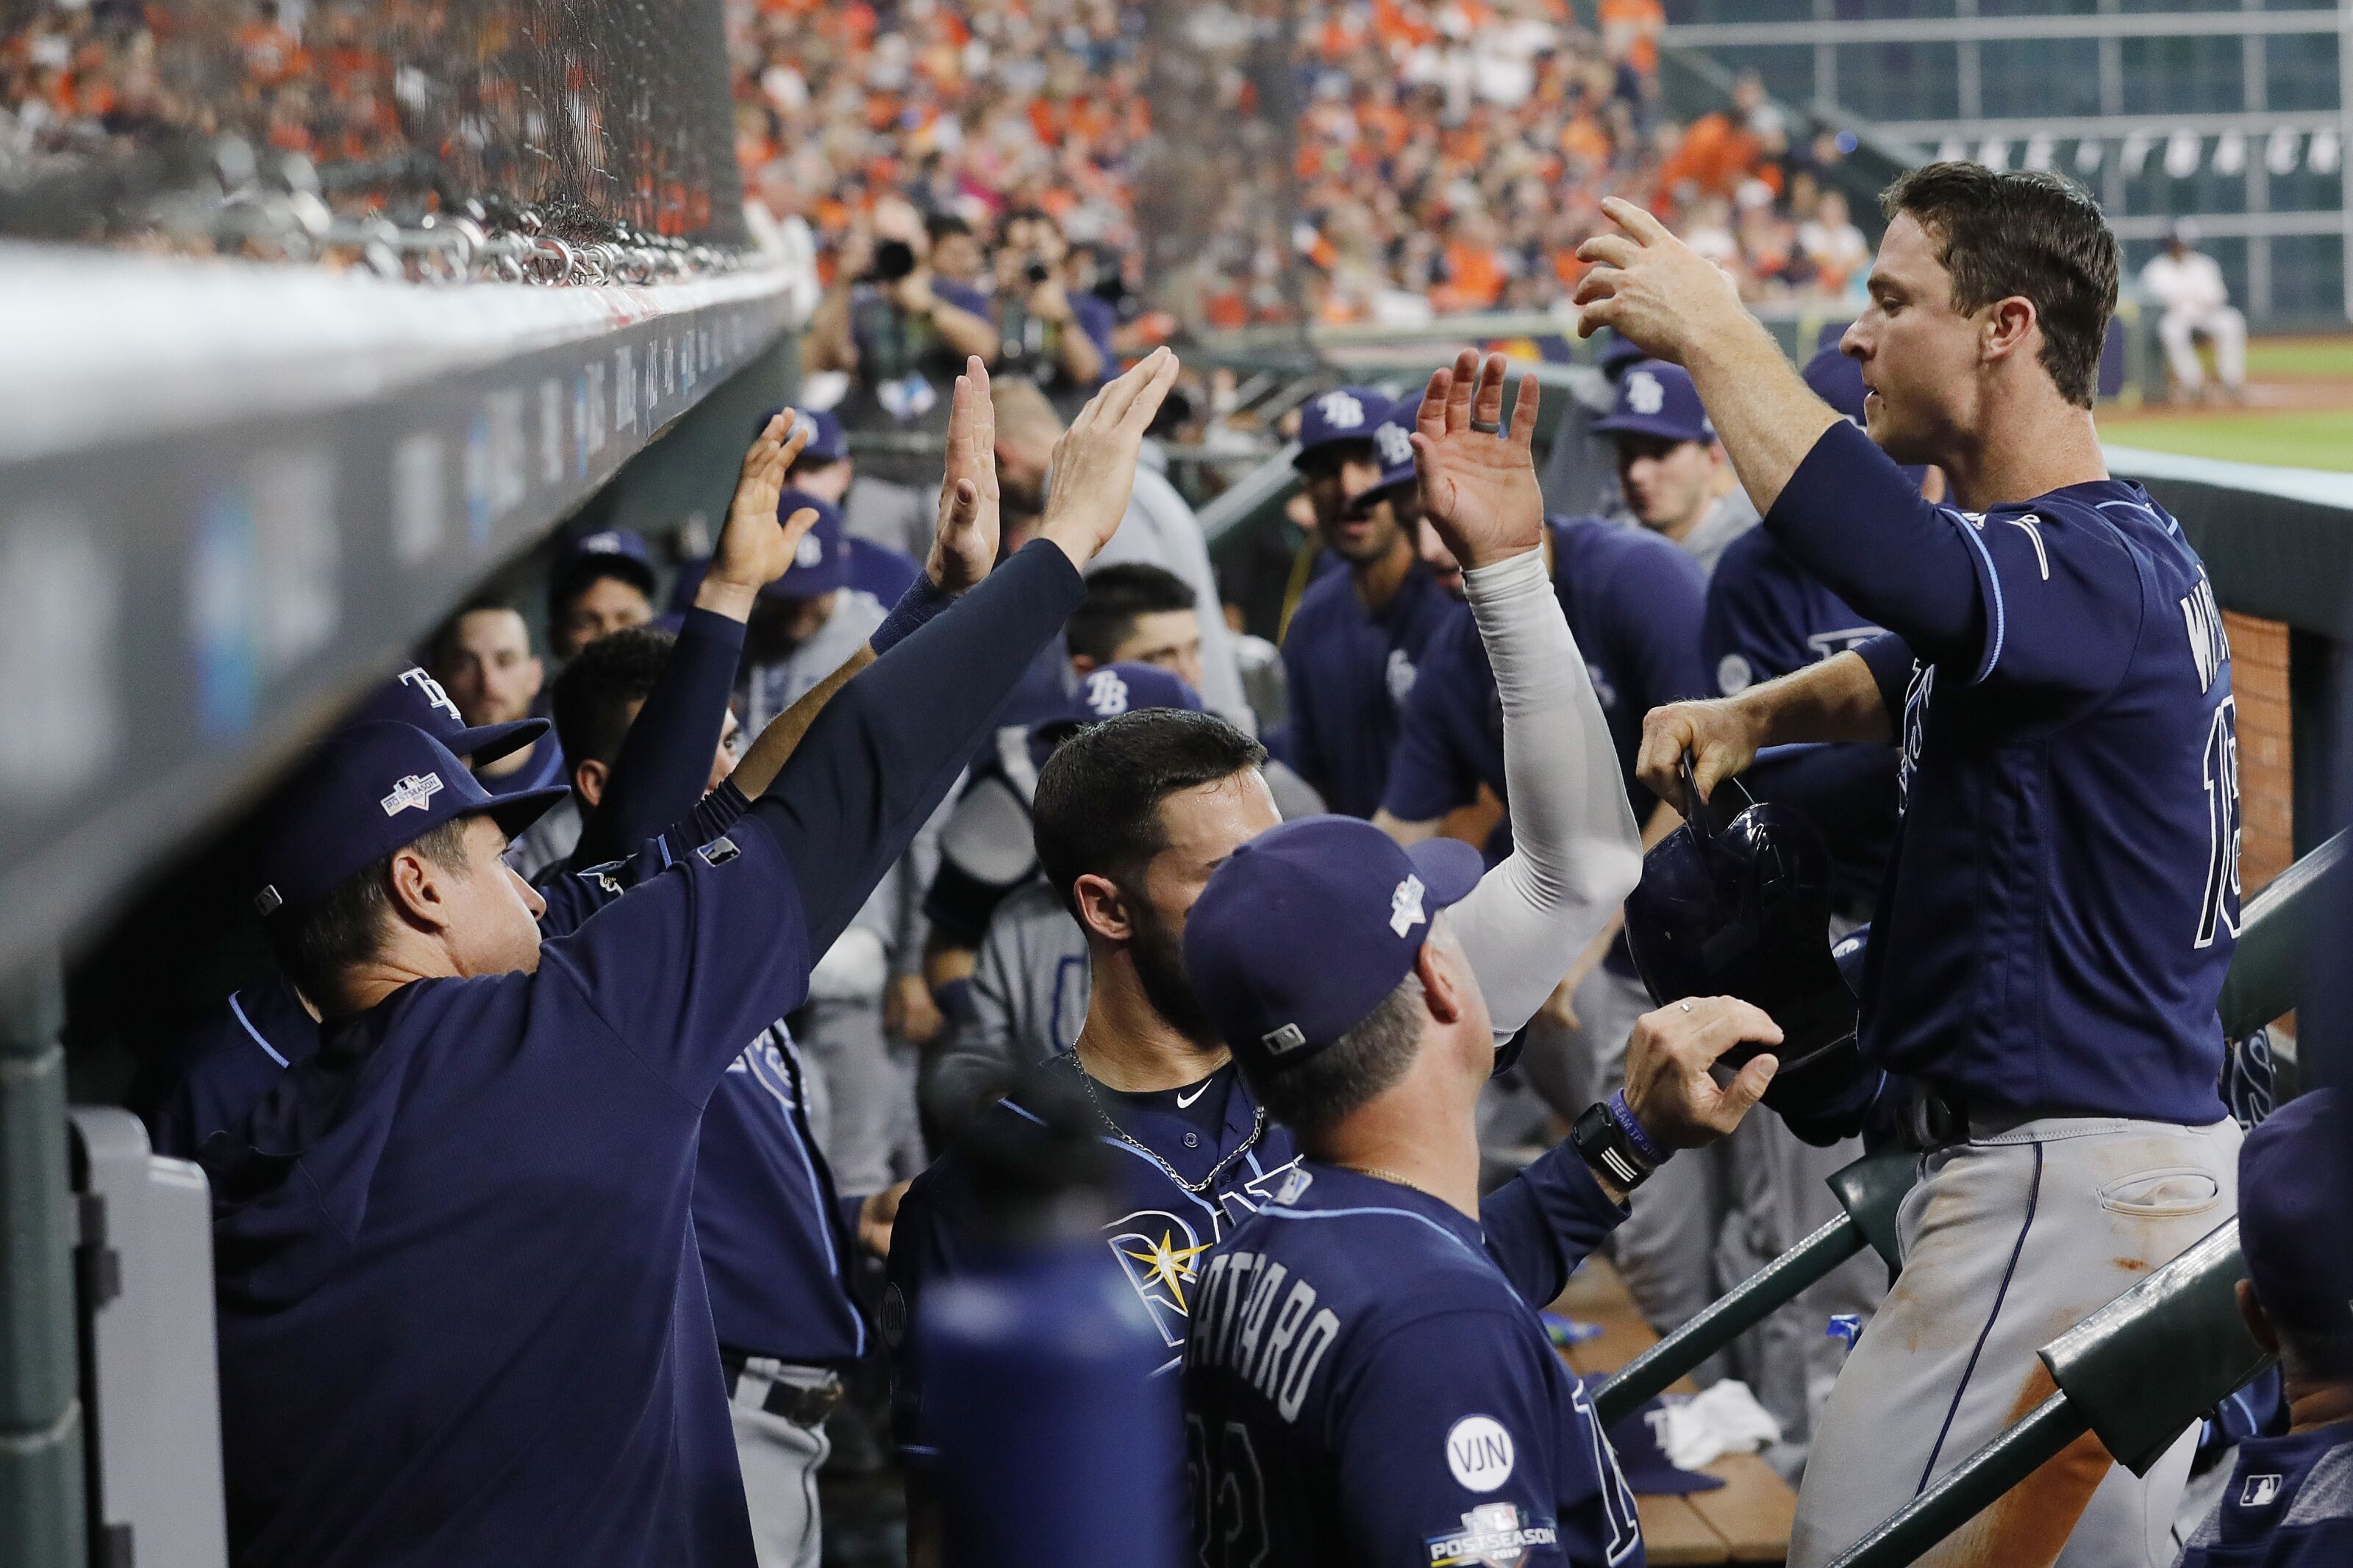 Tampa Bay Rays Projected to Win 92 Games by USA Today